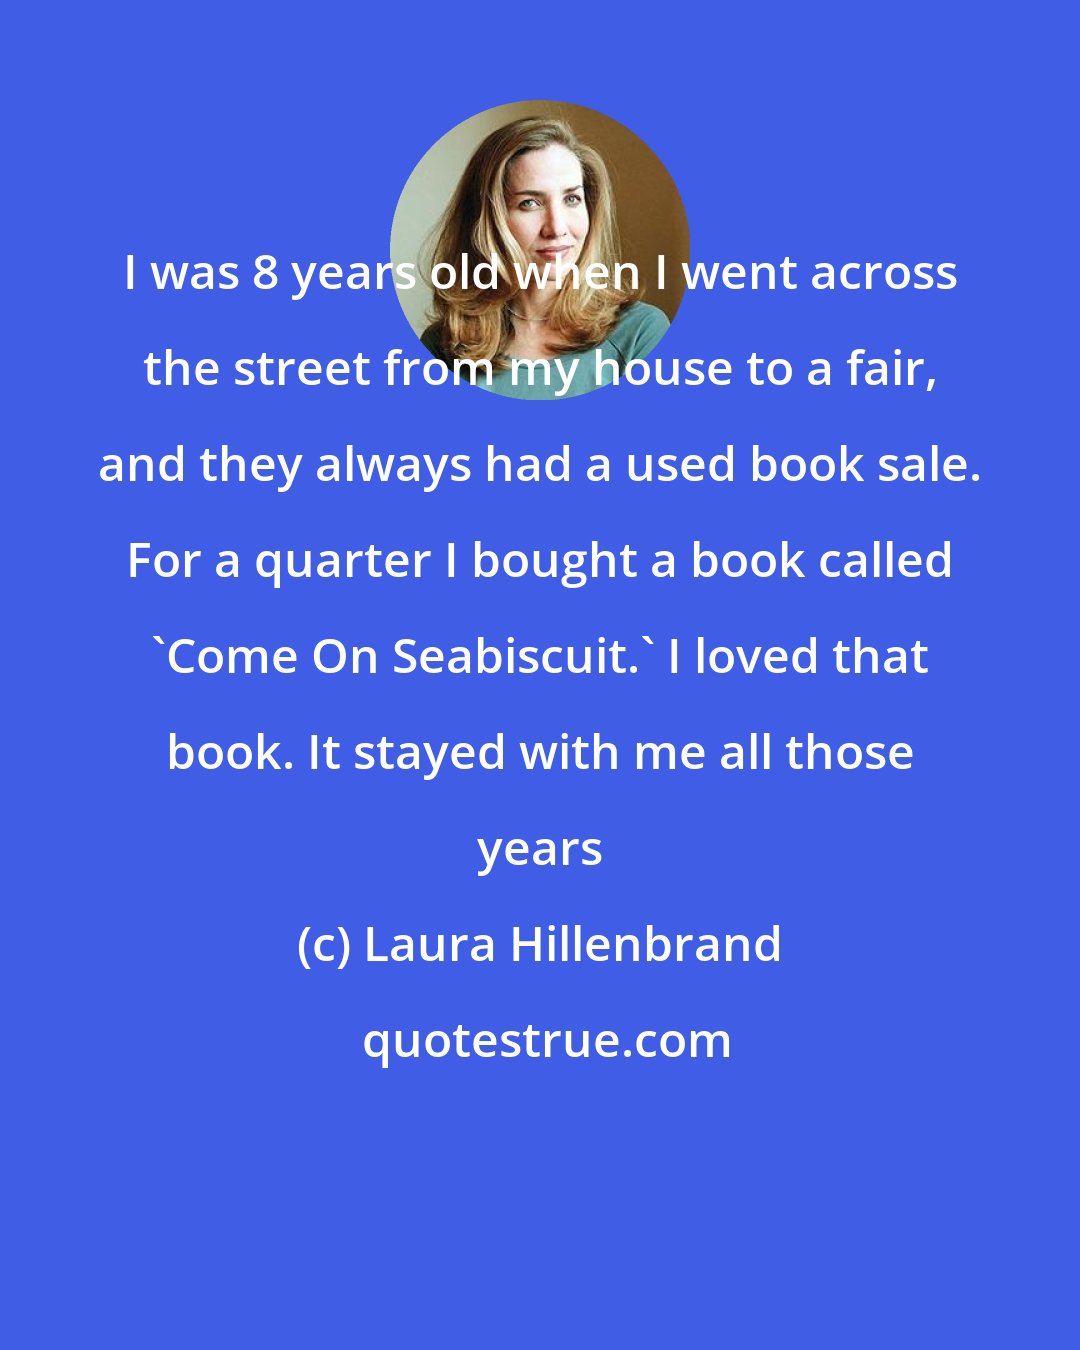 Laura Hillenbrand: I was 8 years old when I went across the street from my house to a fair, and they always had a used book sale. For a quarter I bought a book called 'Come On Seabiscuit.' I loved that book. It stayed with me all those years